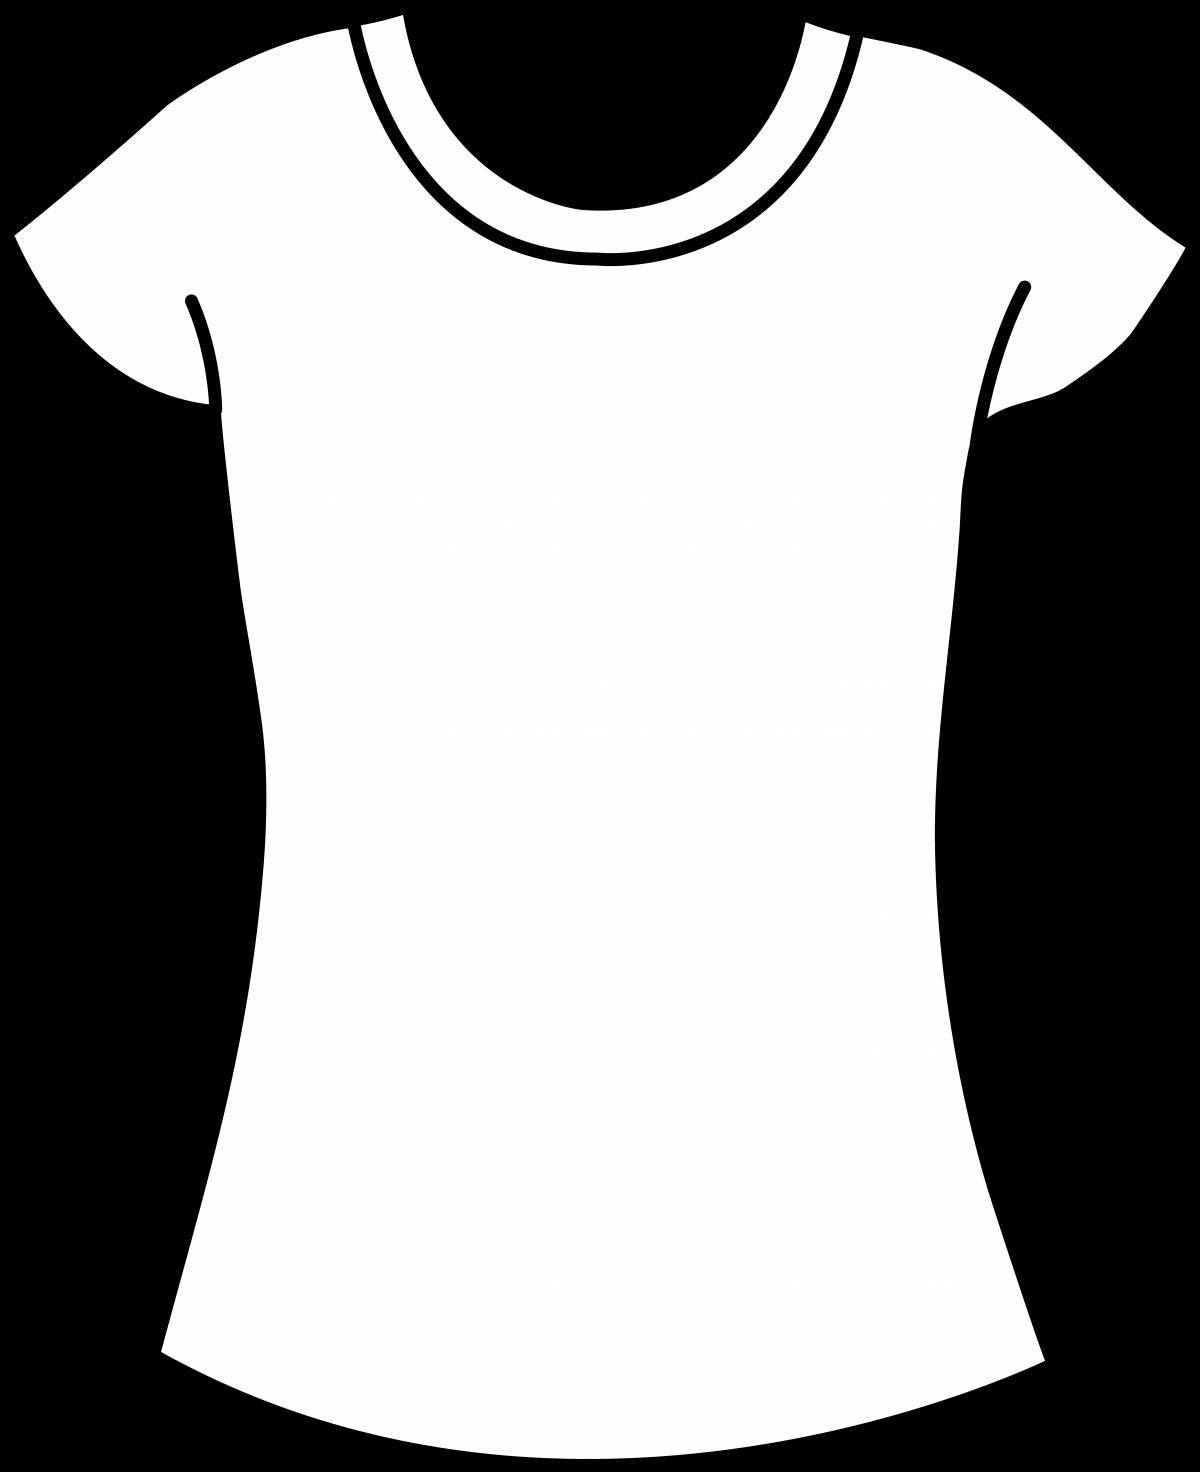 Colorful t-shirt coloring page for kids to express